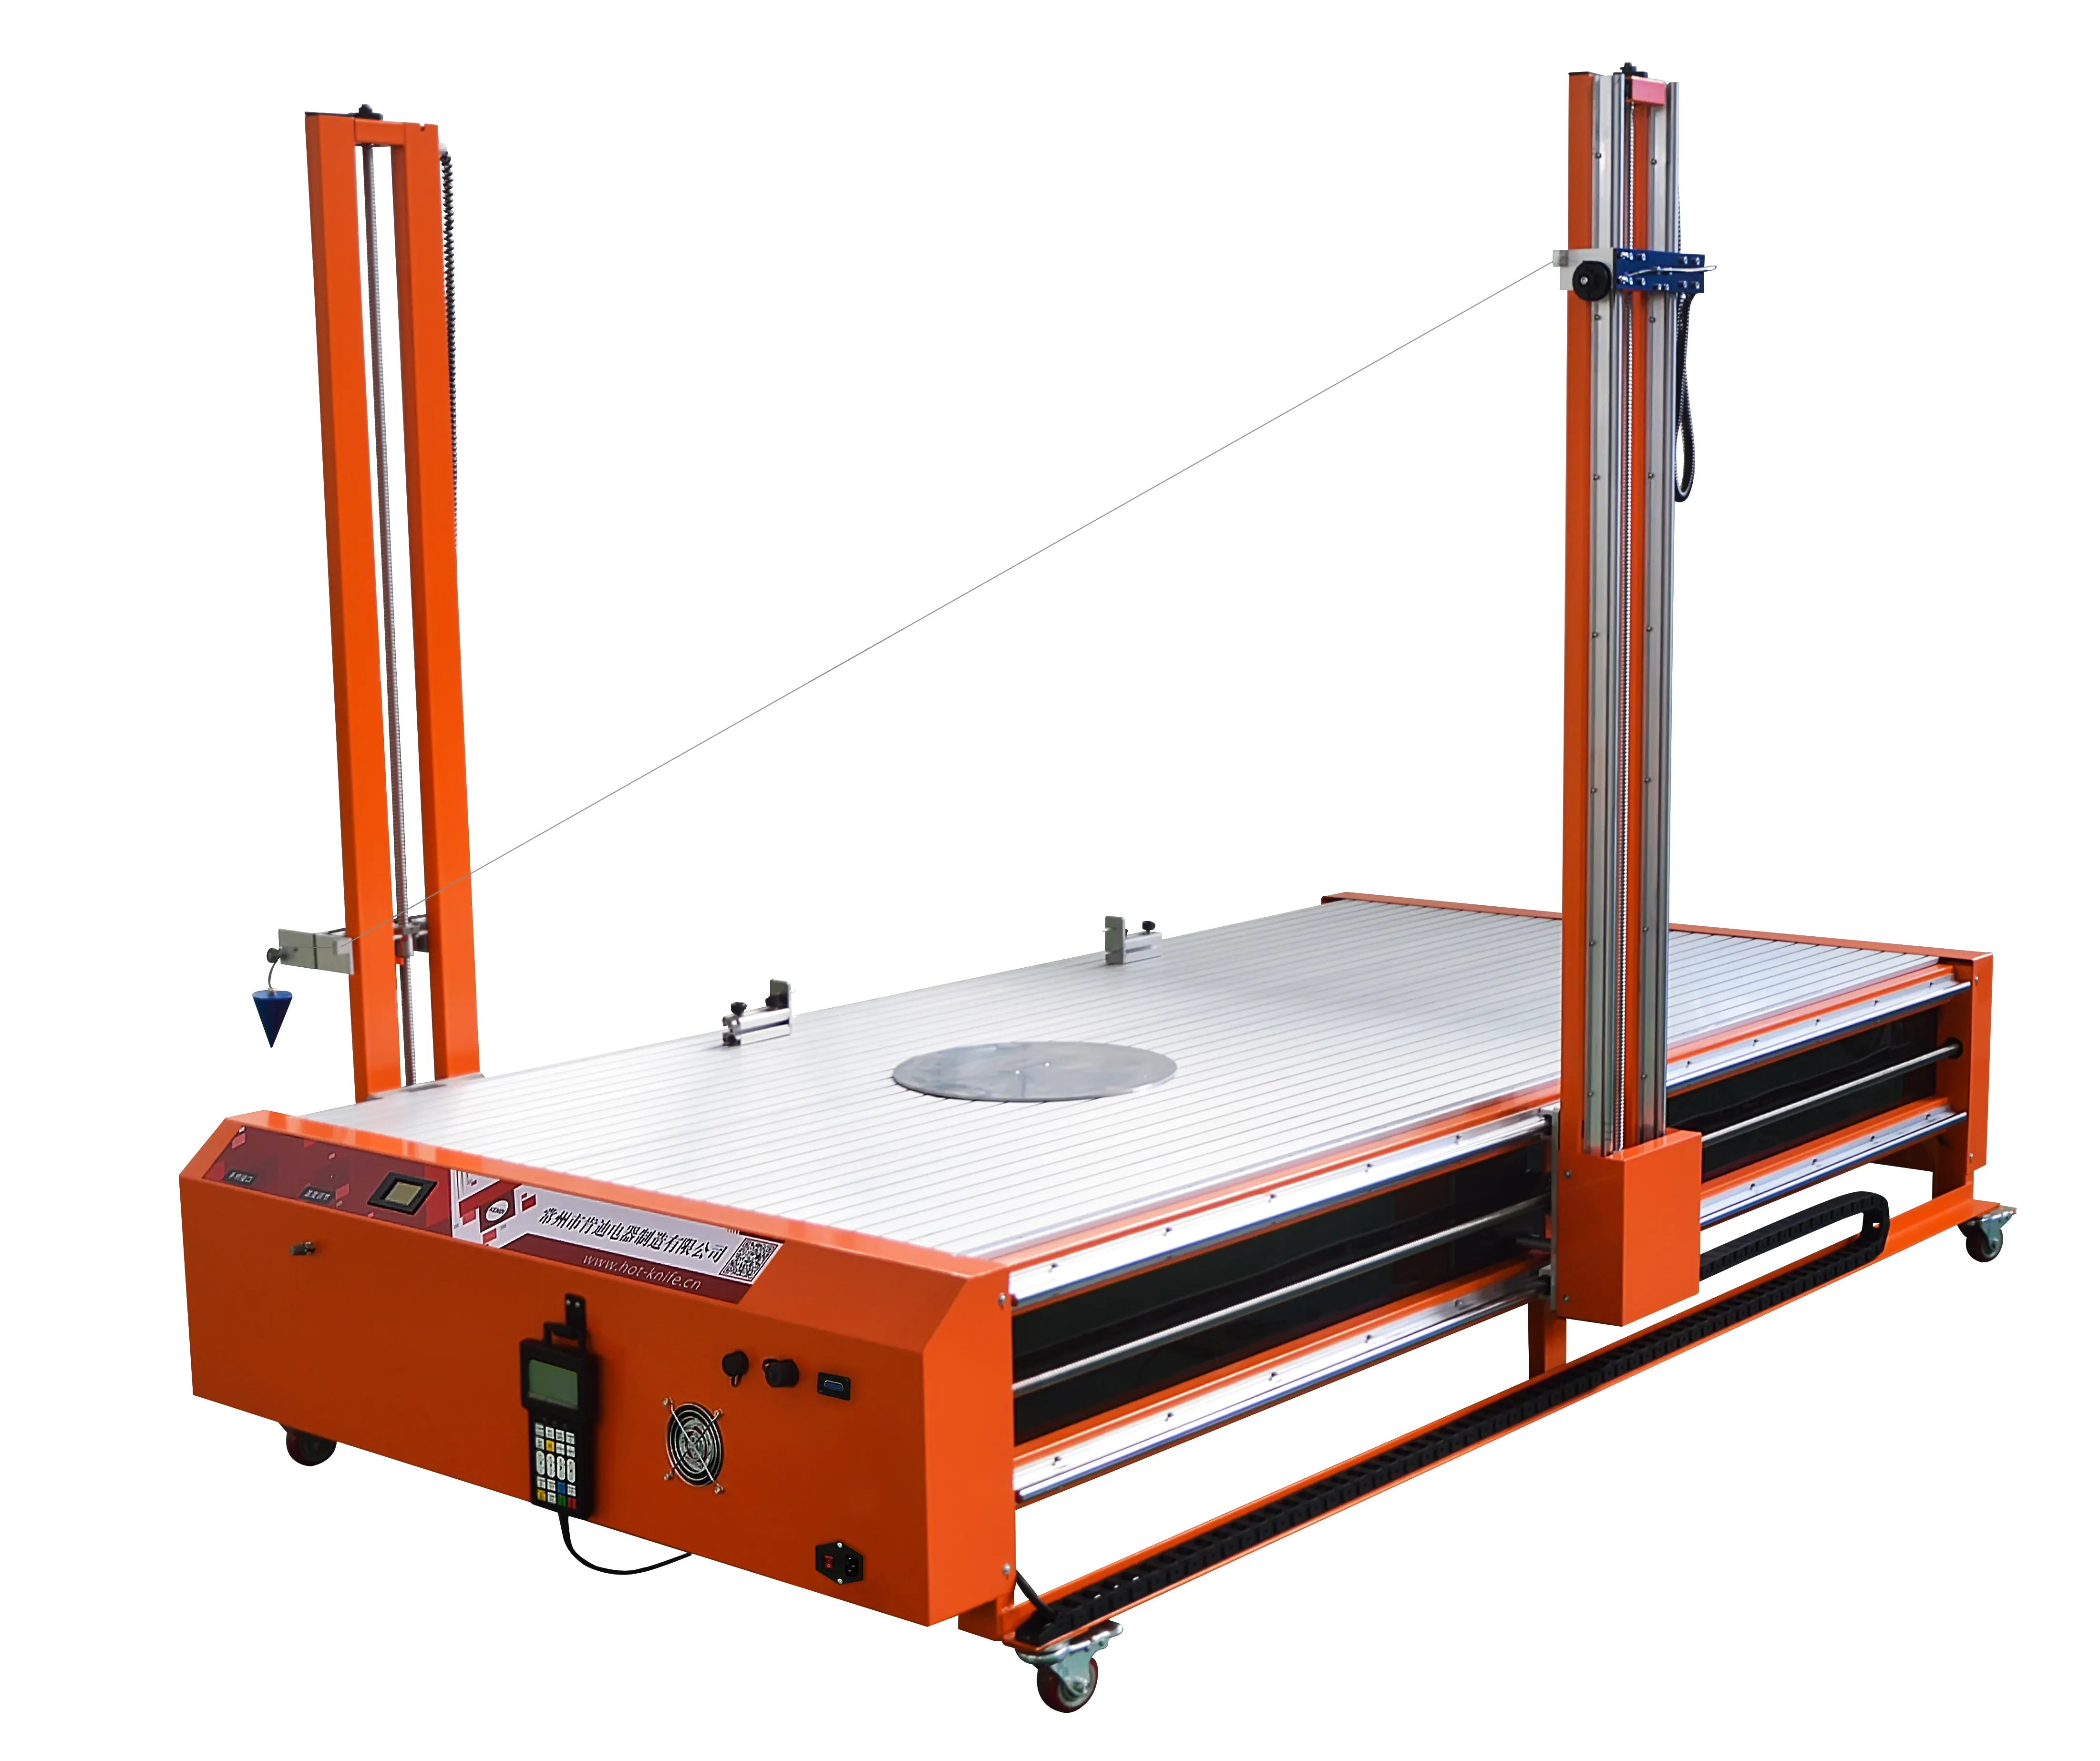 5 Axis Hot Wire CNC Foam Cutting Machine Styrofoam Cutter for Advertising and packaging industry